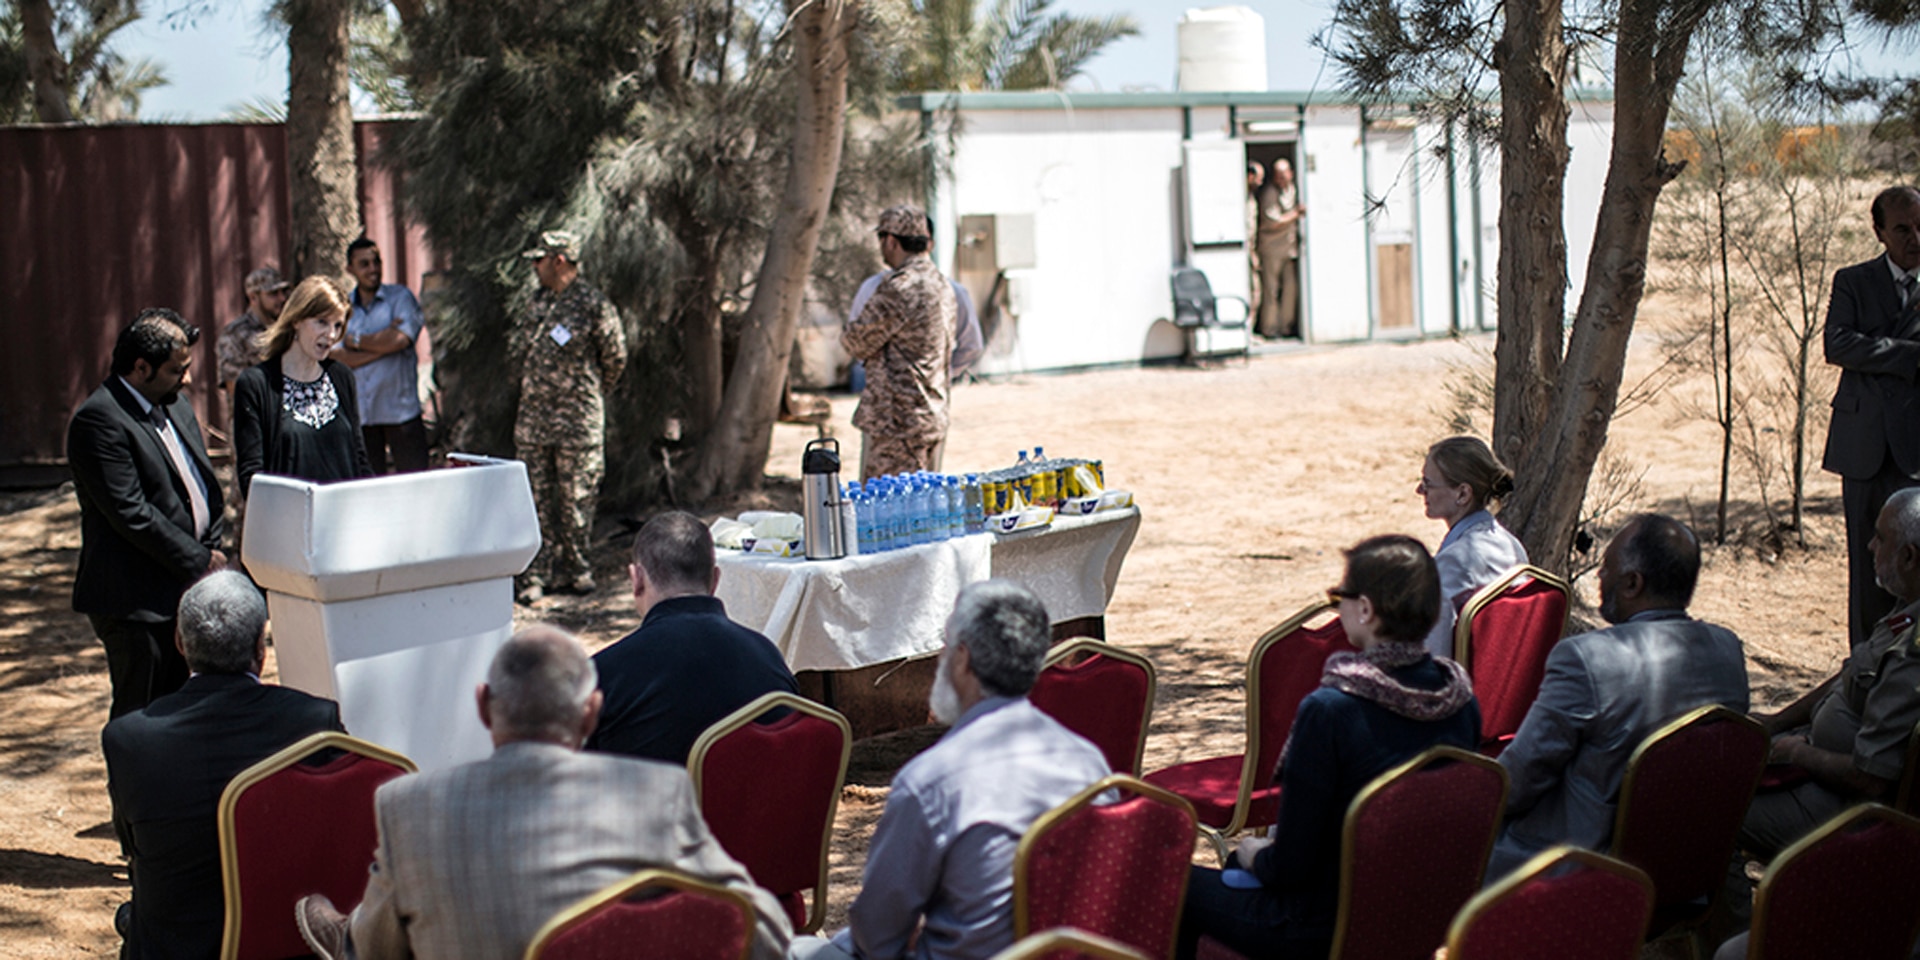 Claudia Marti speaks from a lectern during a conference in Libya.